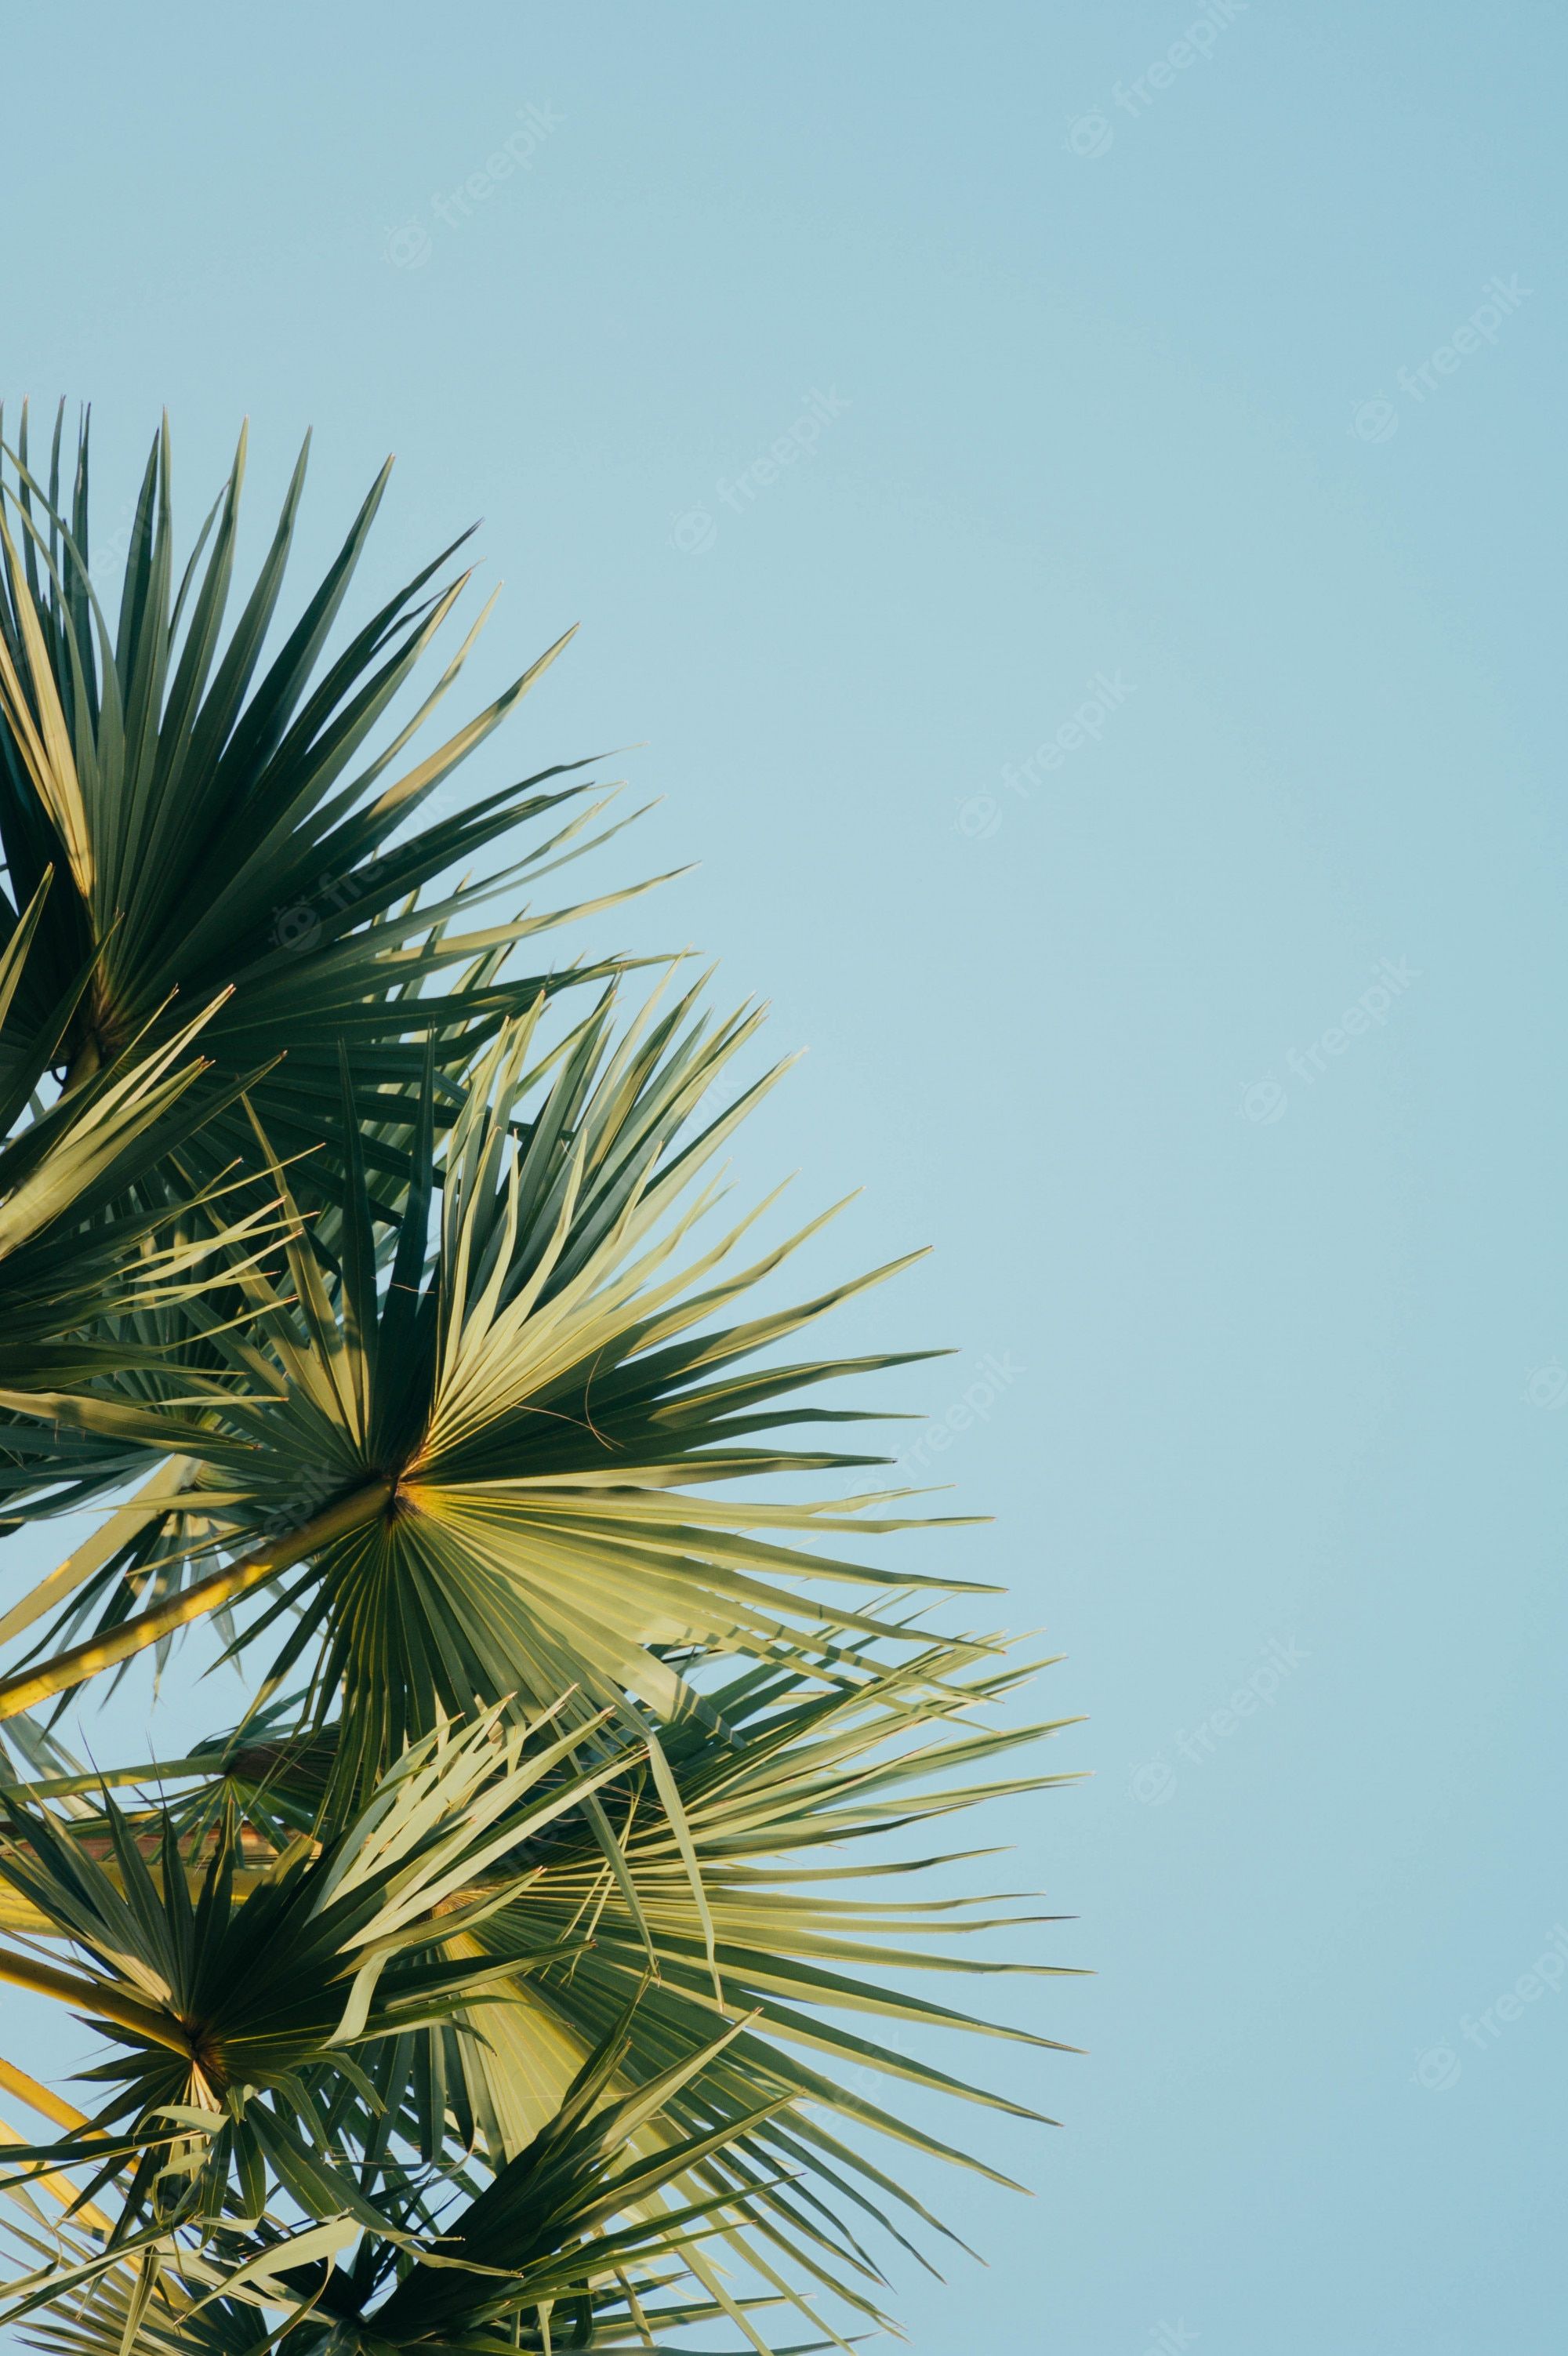 A palm tree with a blue sky in the background - Palm tree